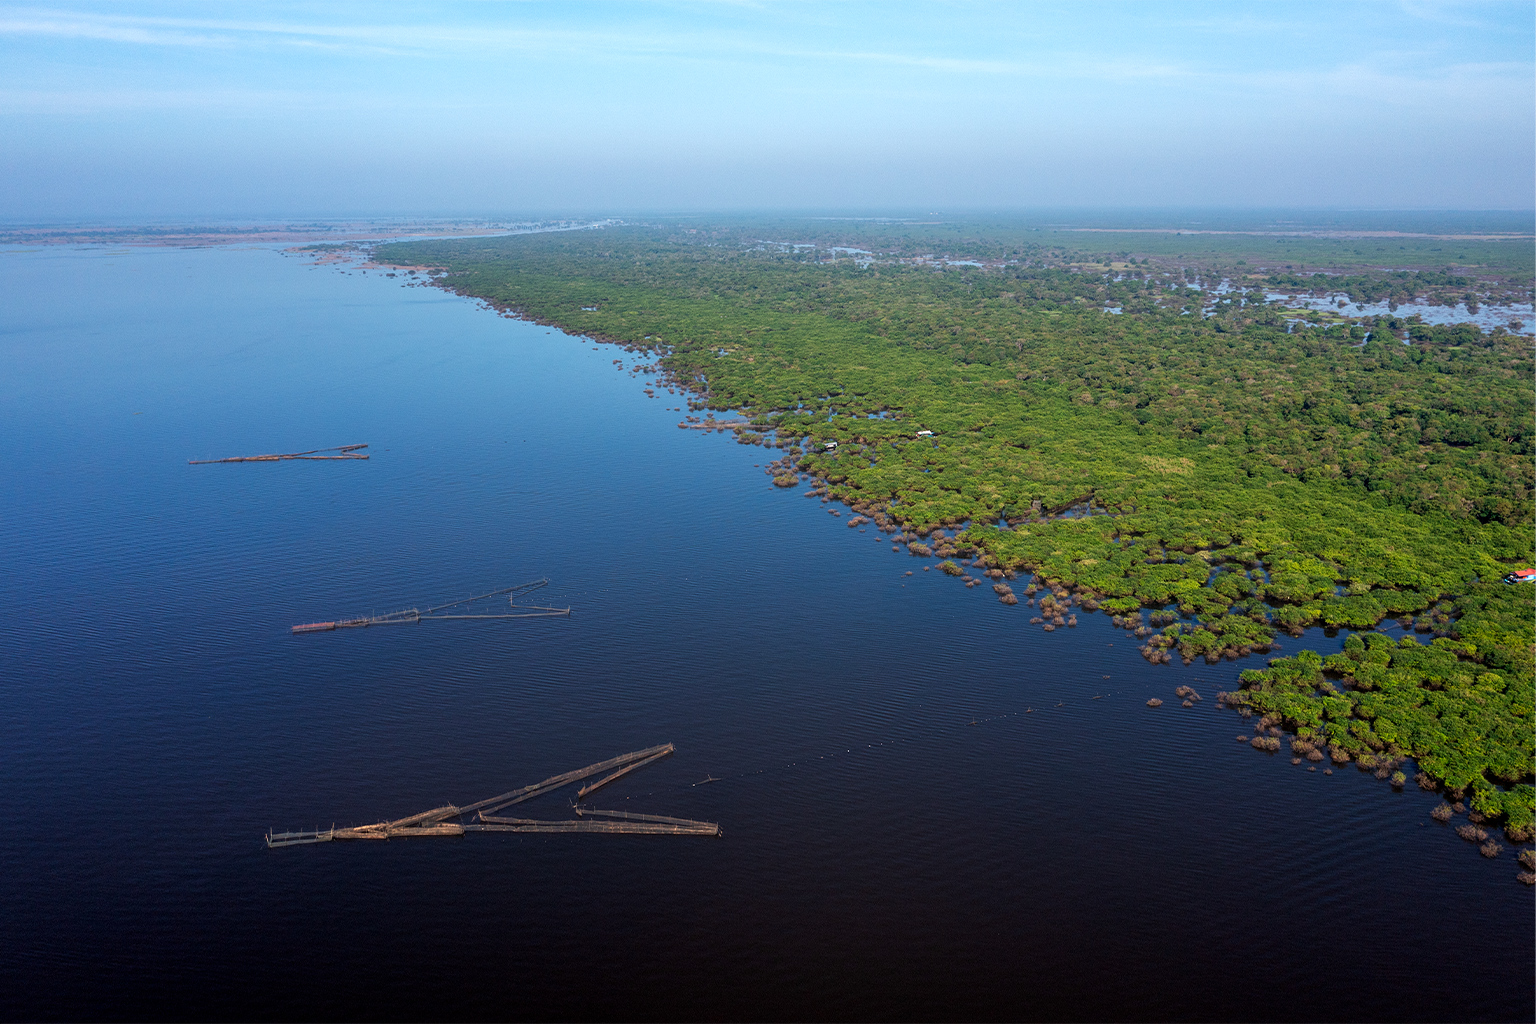 Giant arrowhead fishing traps line the edge of the flooded forest in Tonle Sap Lake.